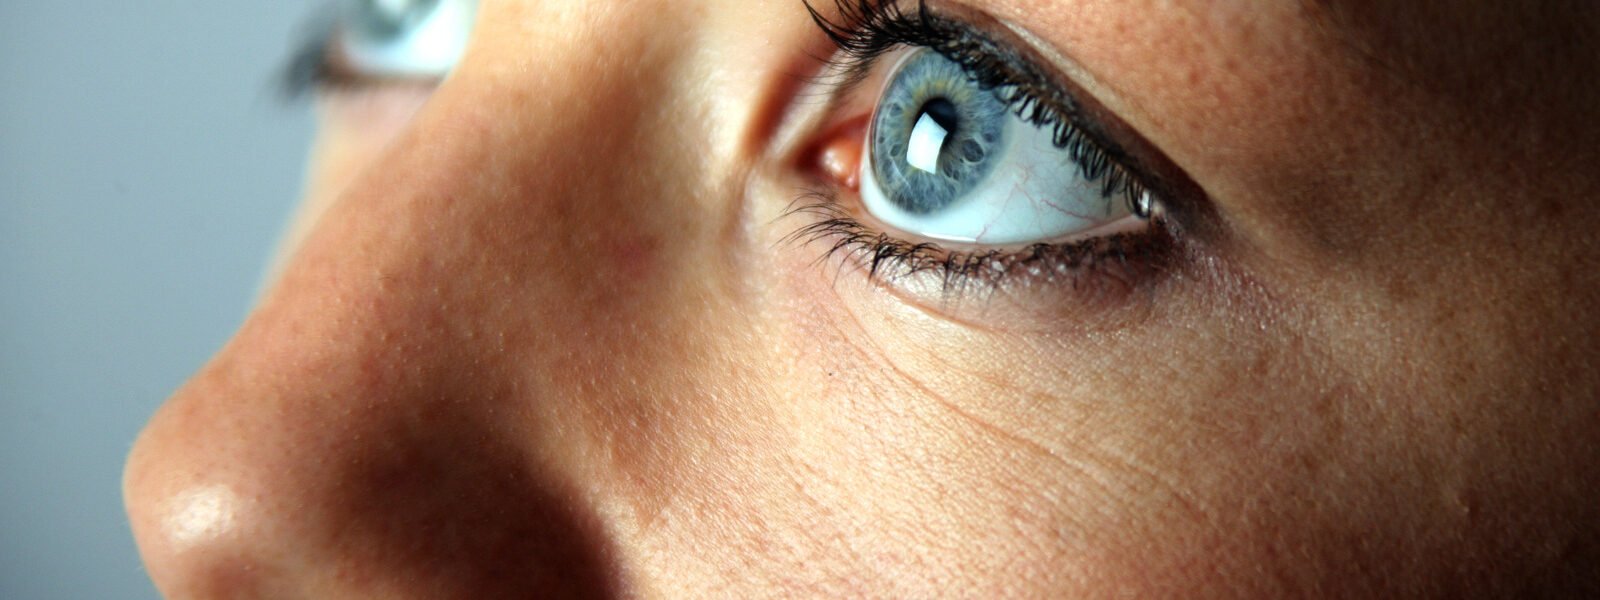 Eat This Unexpected Protein To Improve Your Eye Health - Health Digest